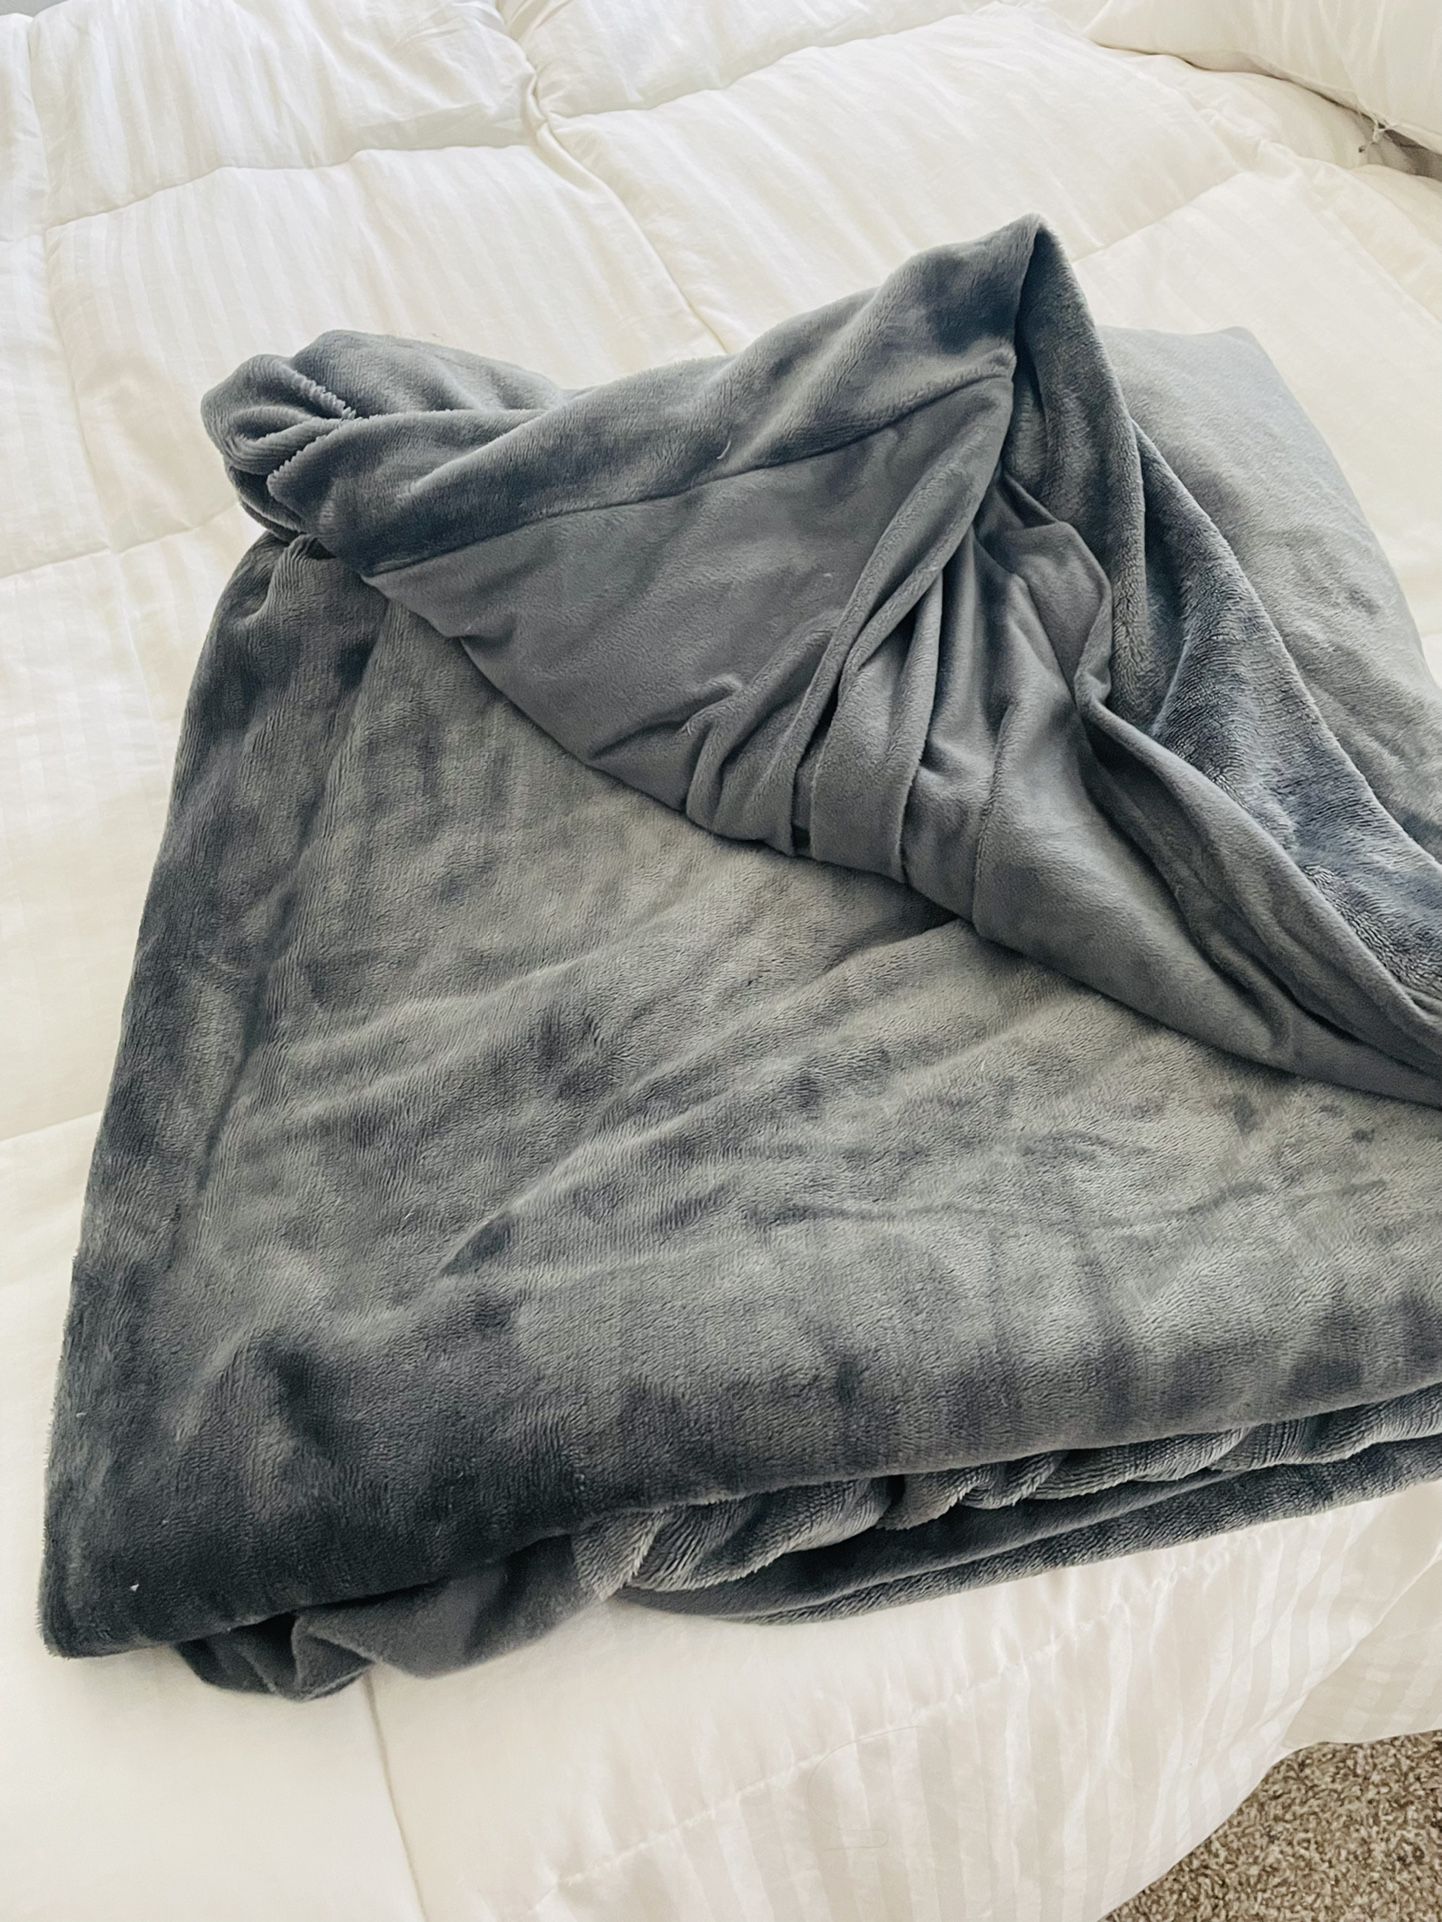 Brookstone Weighted Blanket 